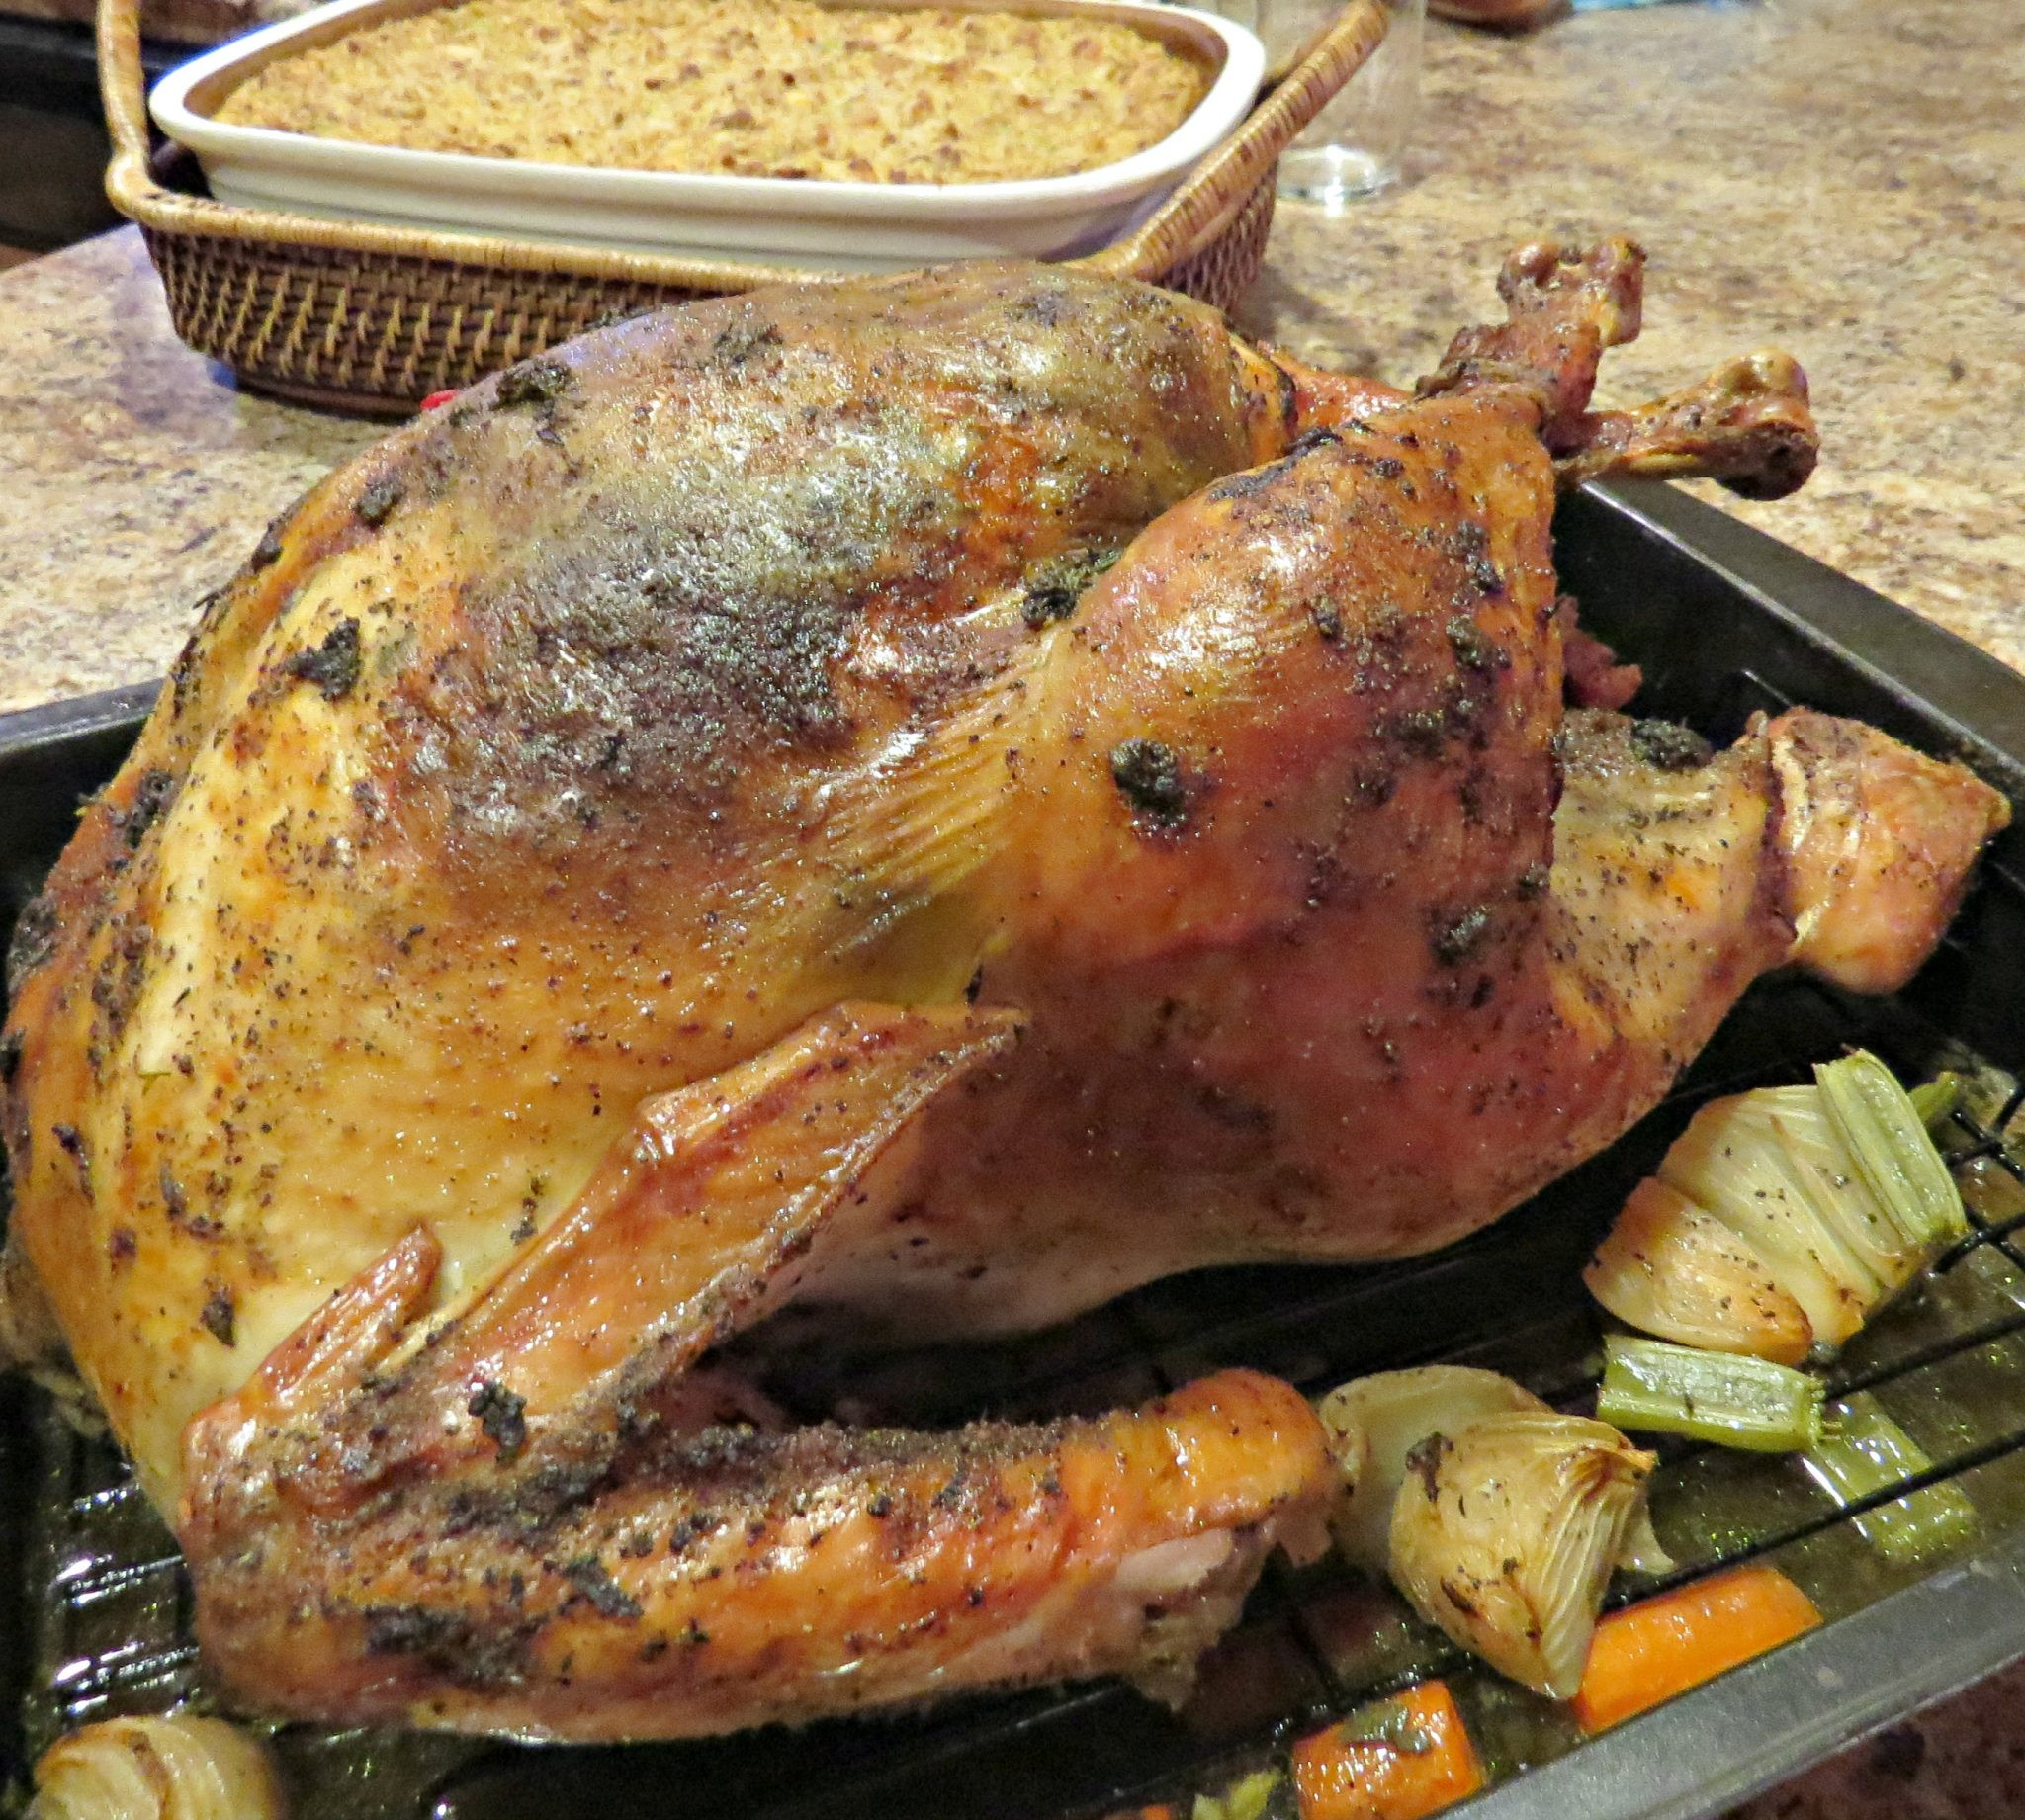 Baking Thanksgiving Turkey
 How To Bake A Turkey That s Moist and Delicious Written